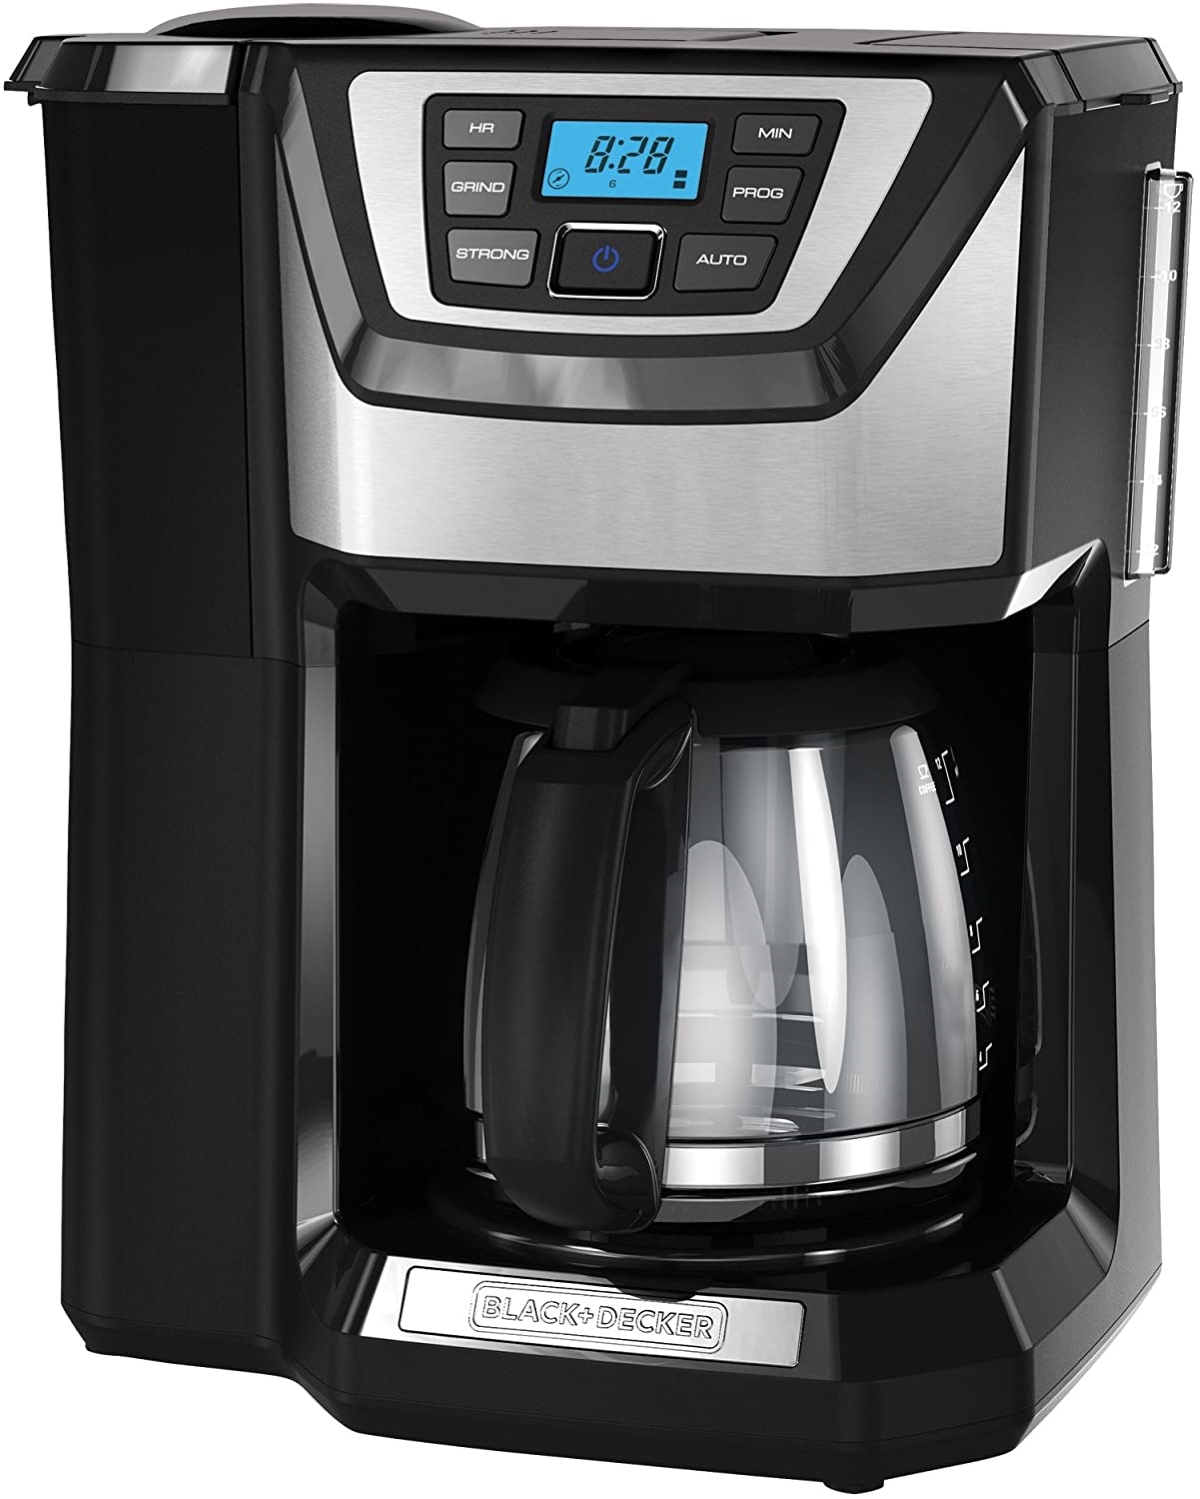 types of coffee makers - coffee maker with digital screen